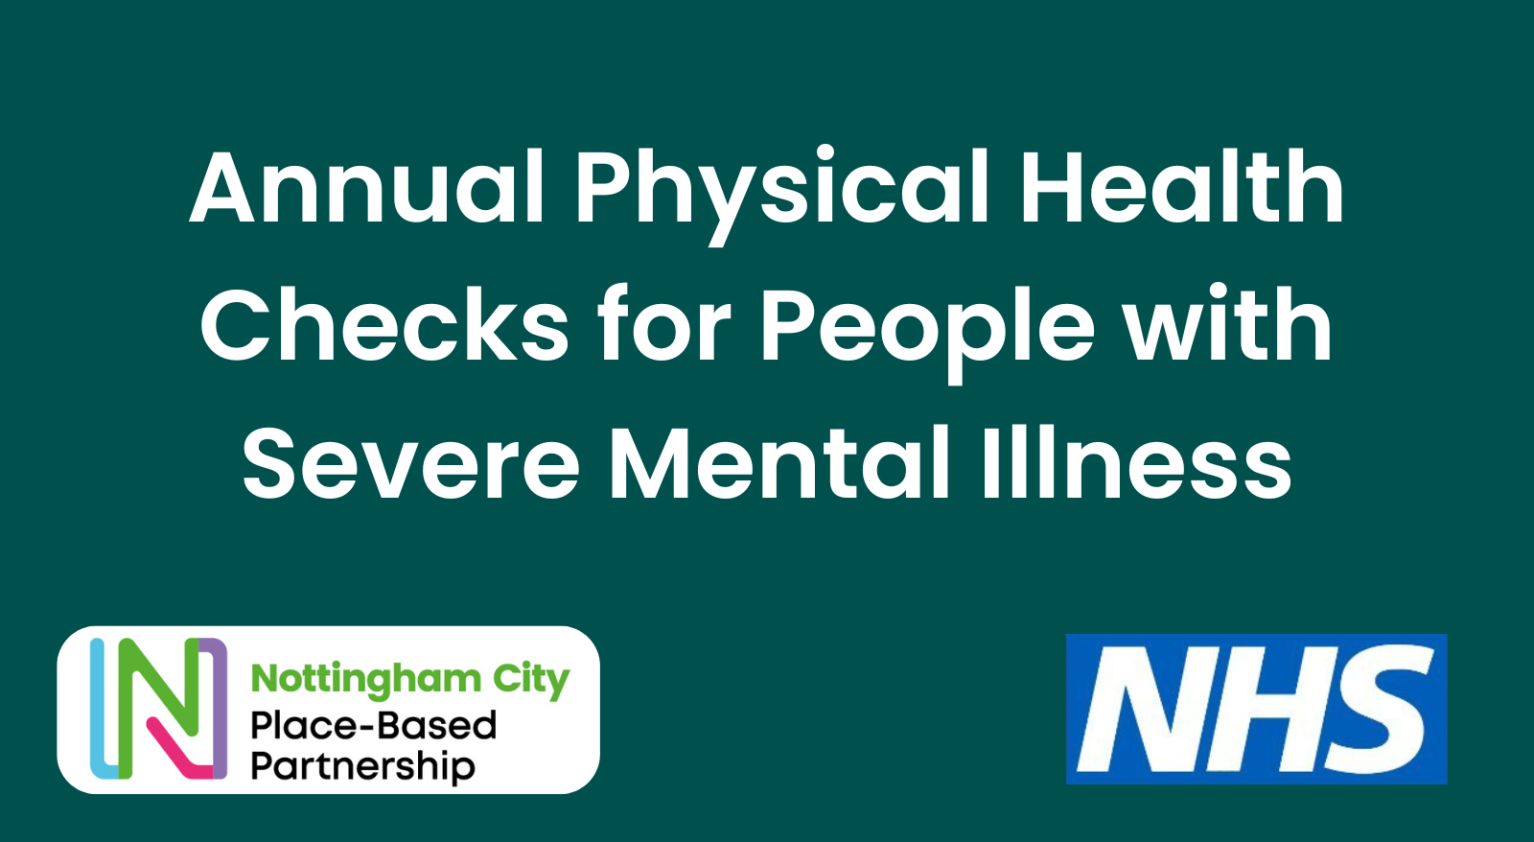 text reads: Annual Physical Health Checks for People with Severe Mental Illness